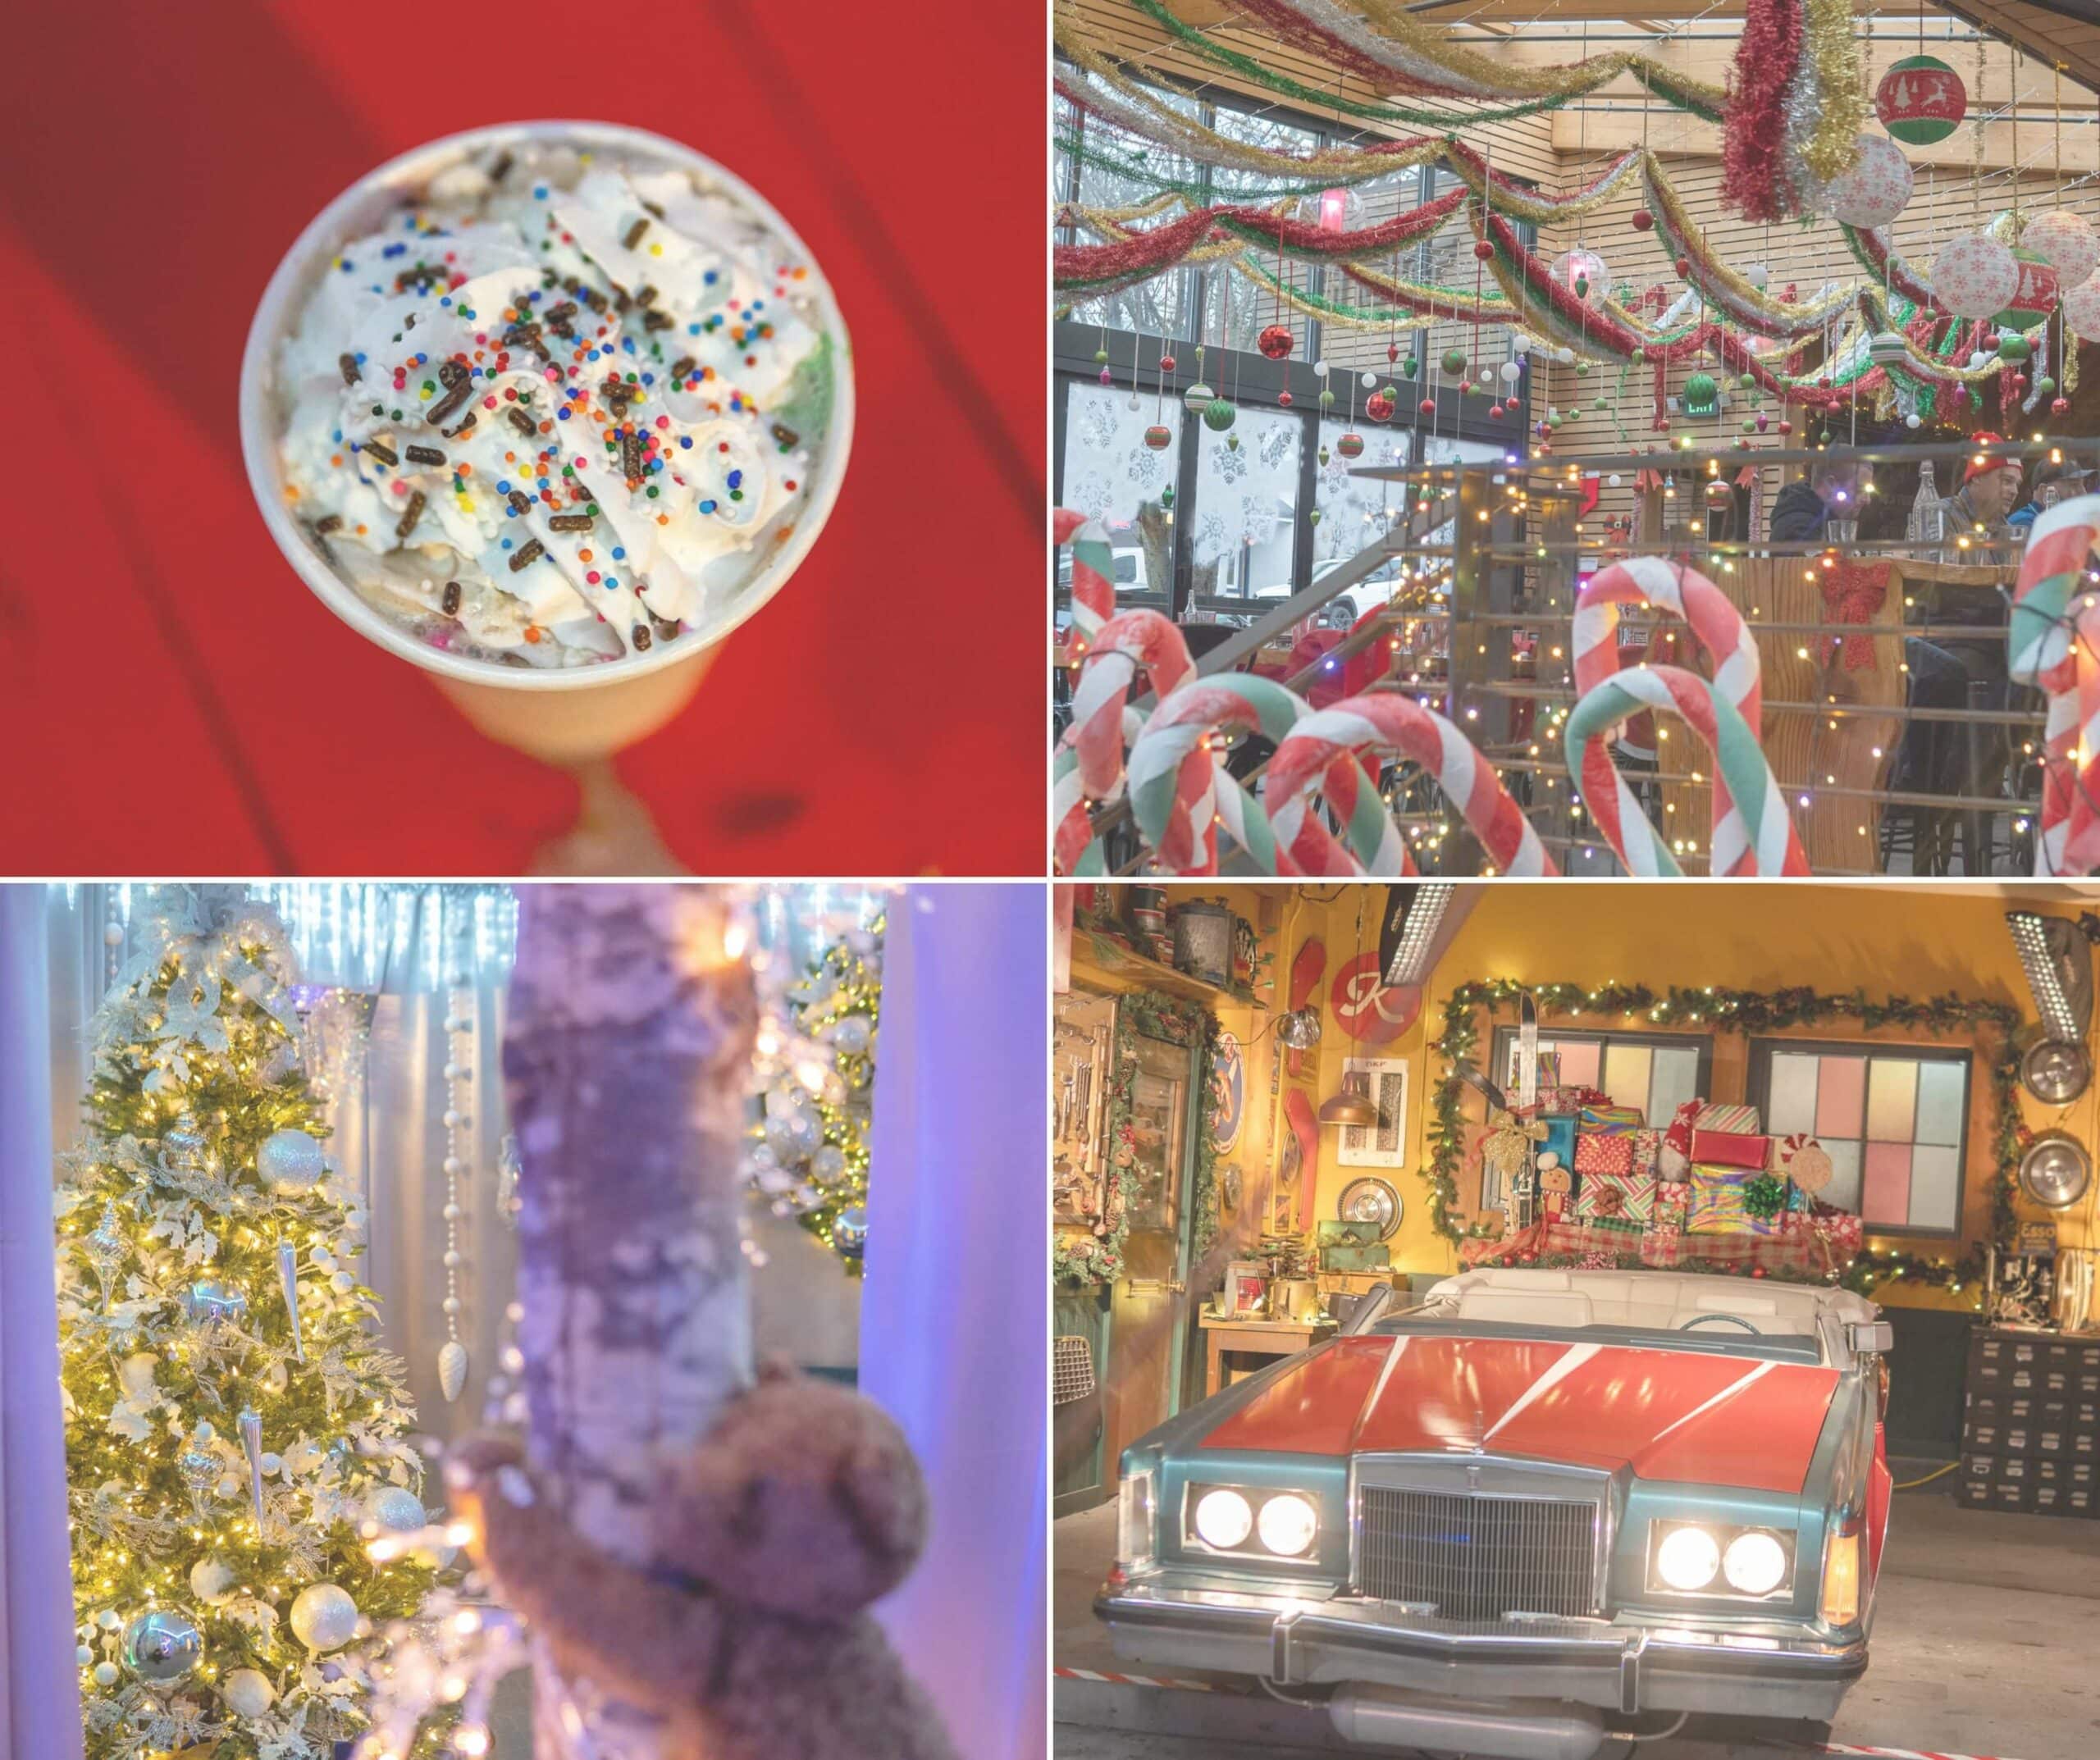 Christmas Shopping at the Bravern - A Million Cool Things to Do Seattle